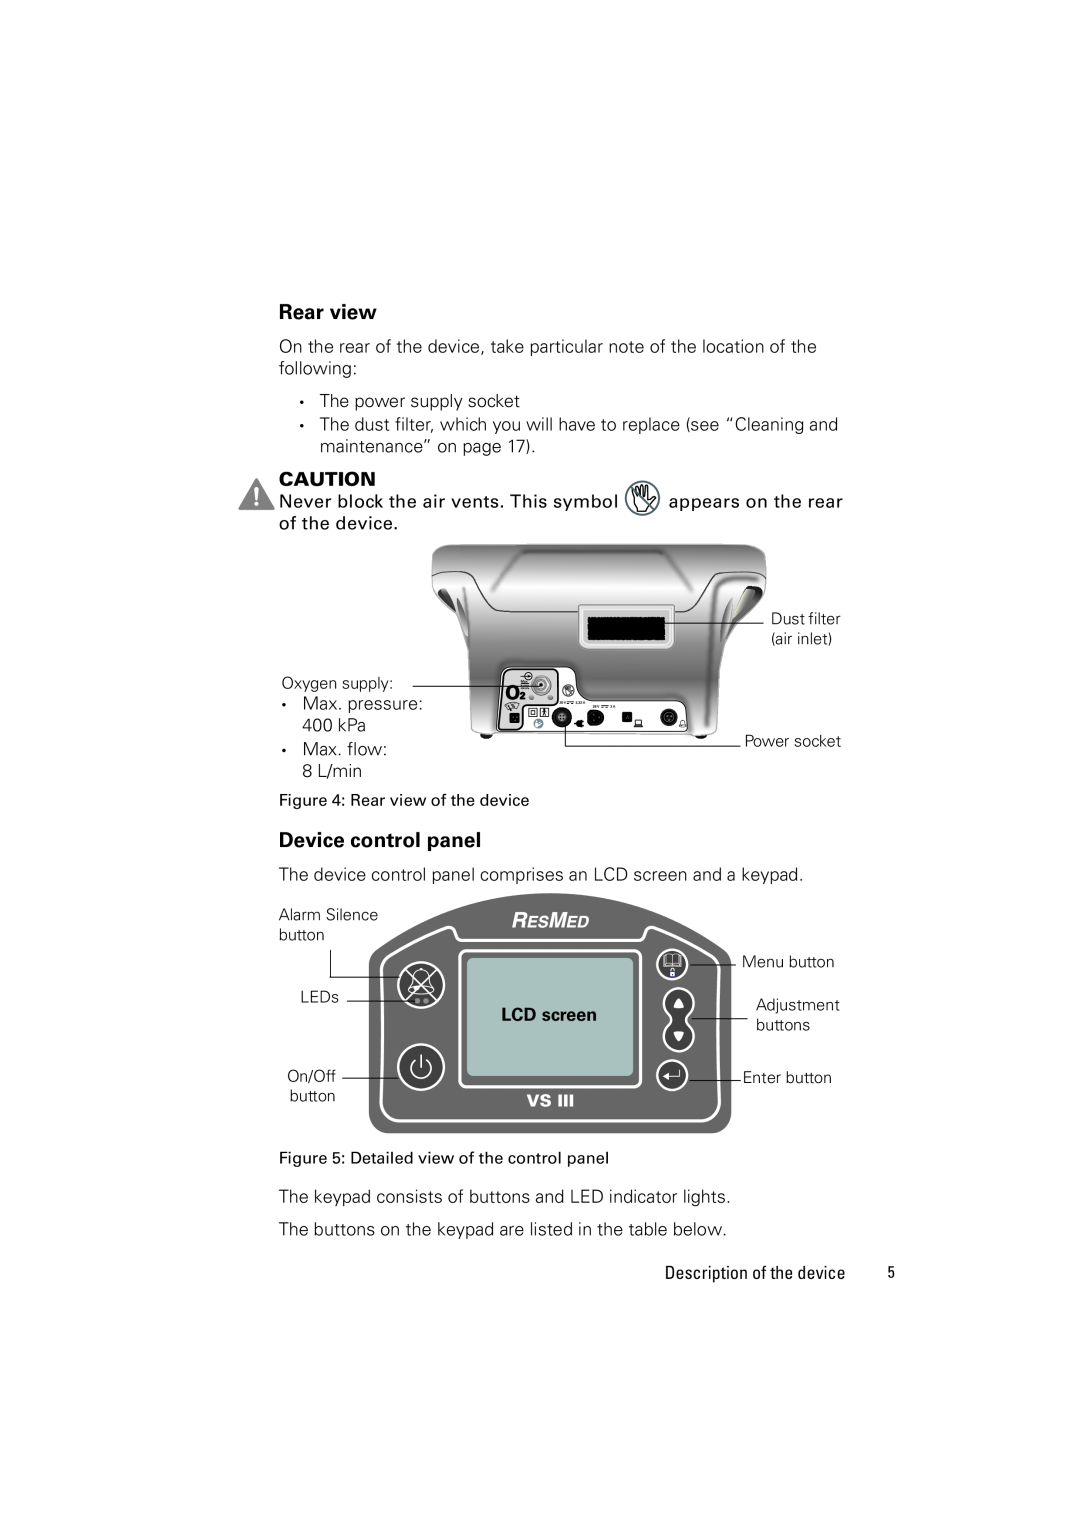 ResMed VS III user manual Rear view, Device control panel 